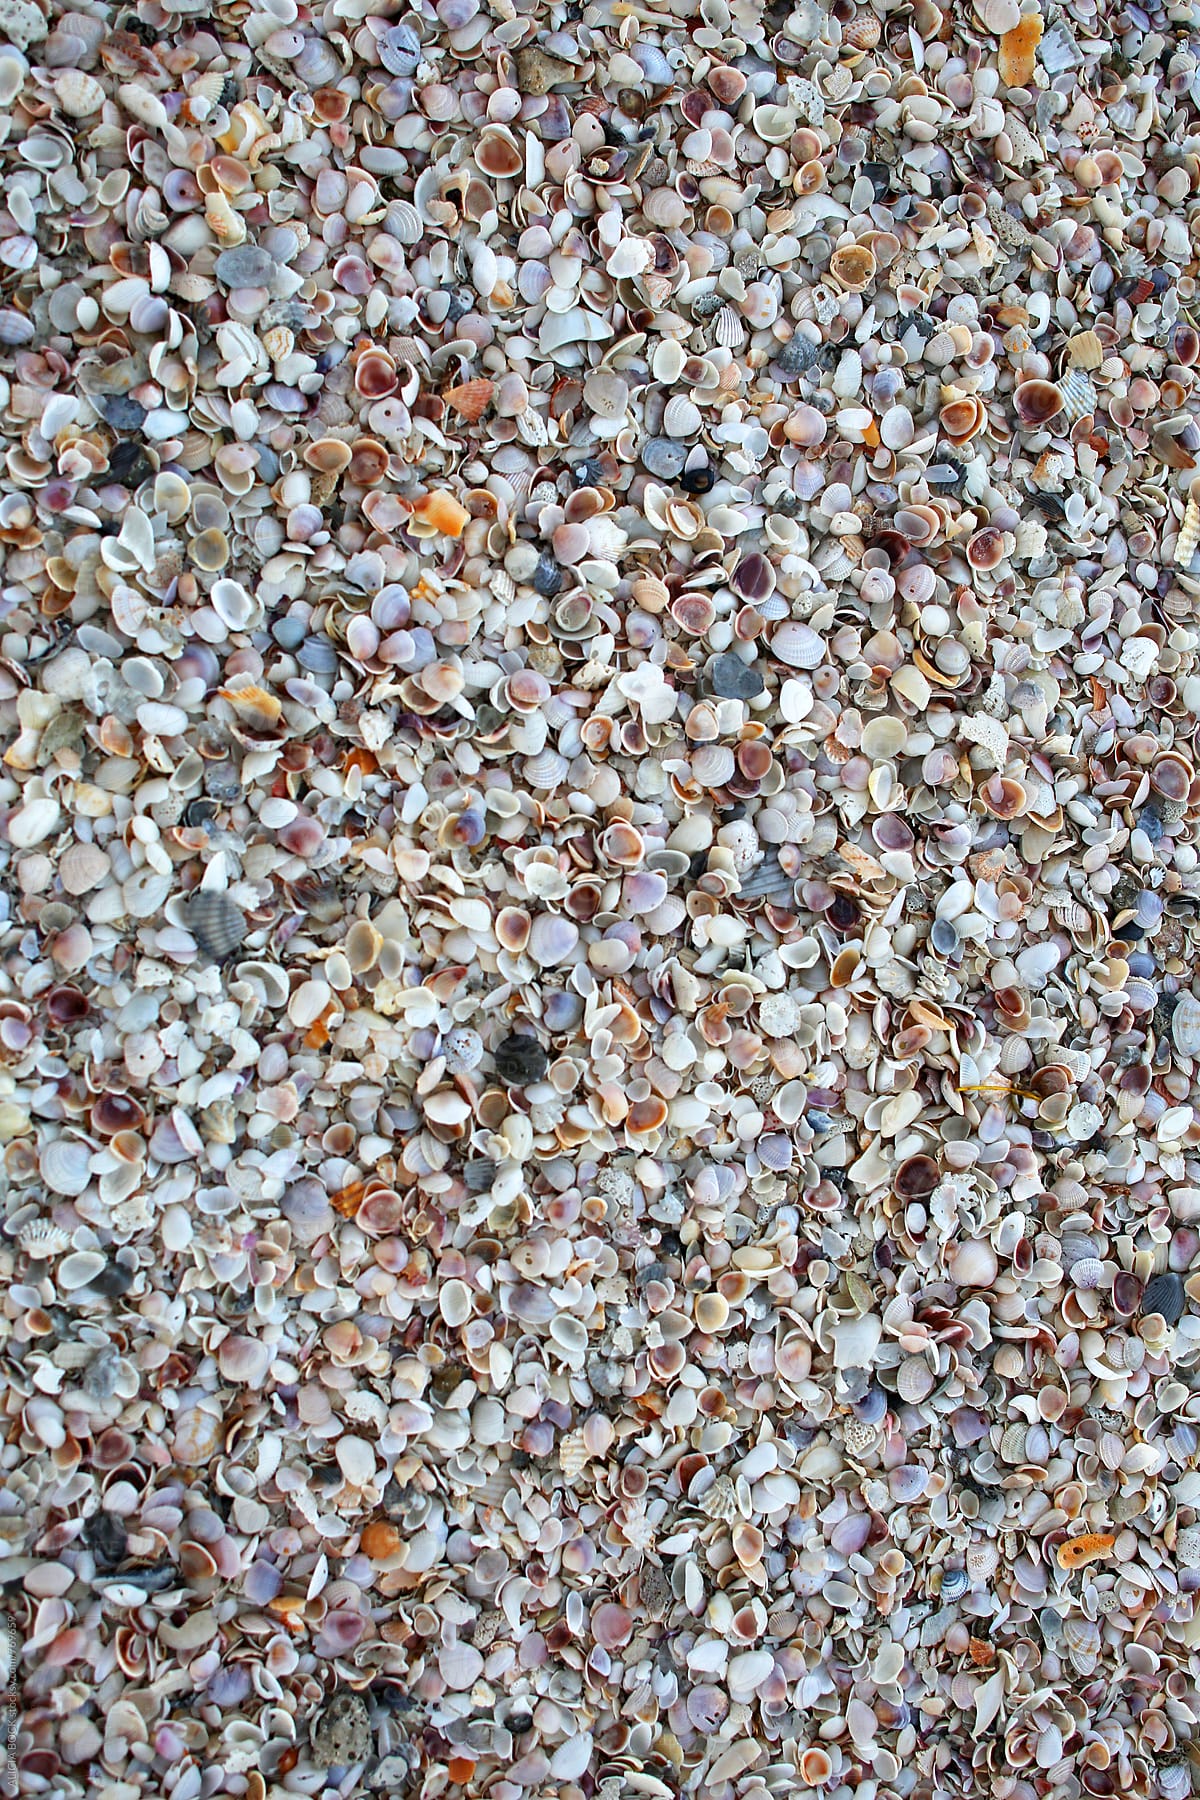 Close Up Of A Beach Made Of Large Amounts Of Small Sea Shells